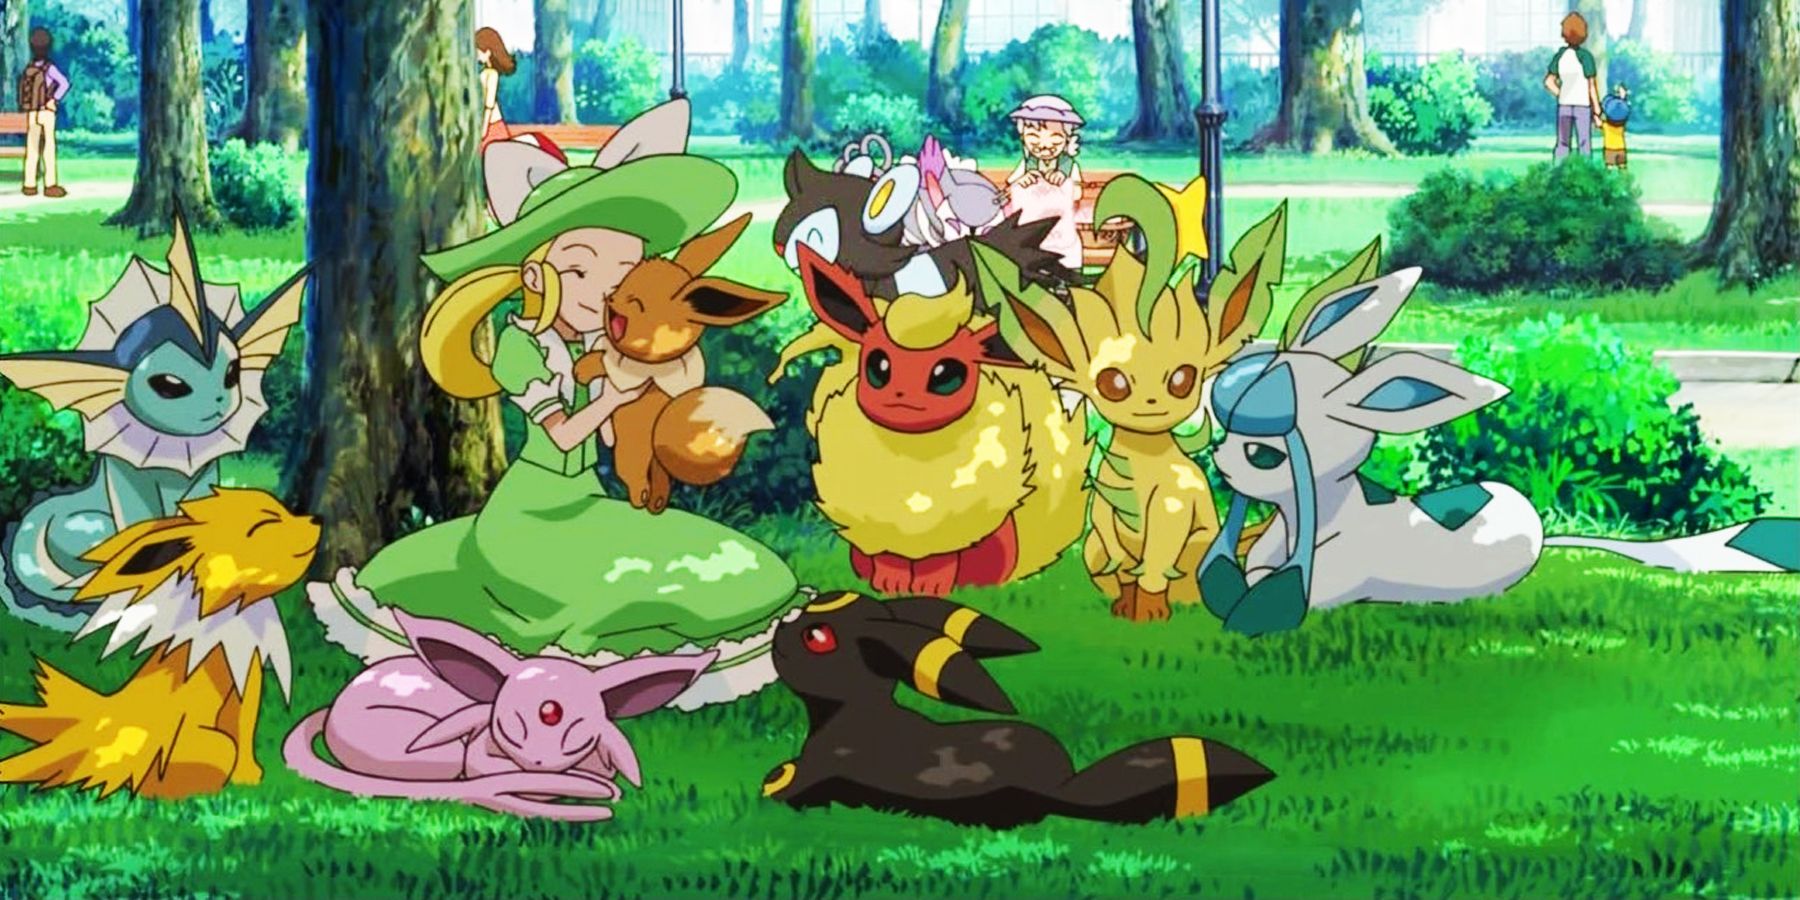 A Lady Pokemon Trainer holding an Eevee with Vaporeon, Jolteon, Espeon, Umbreon, Flareon, Leafeon, and Glaceon around them in a relaxed circle.